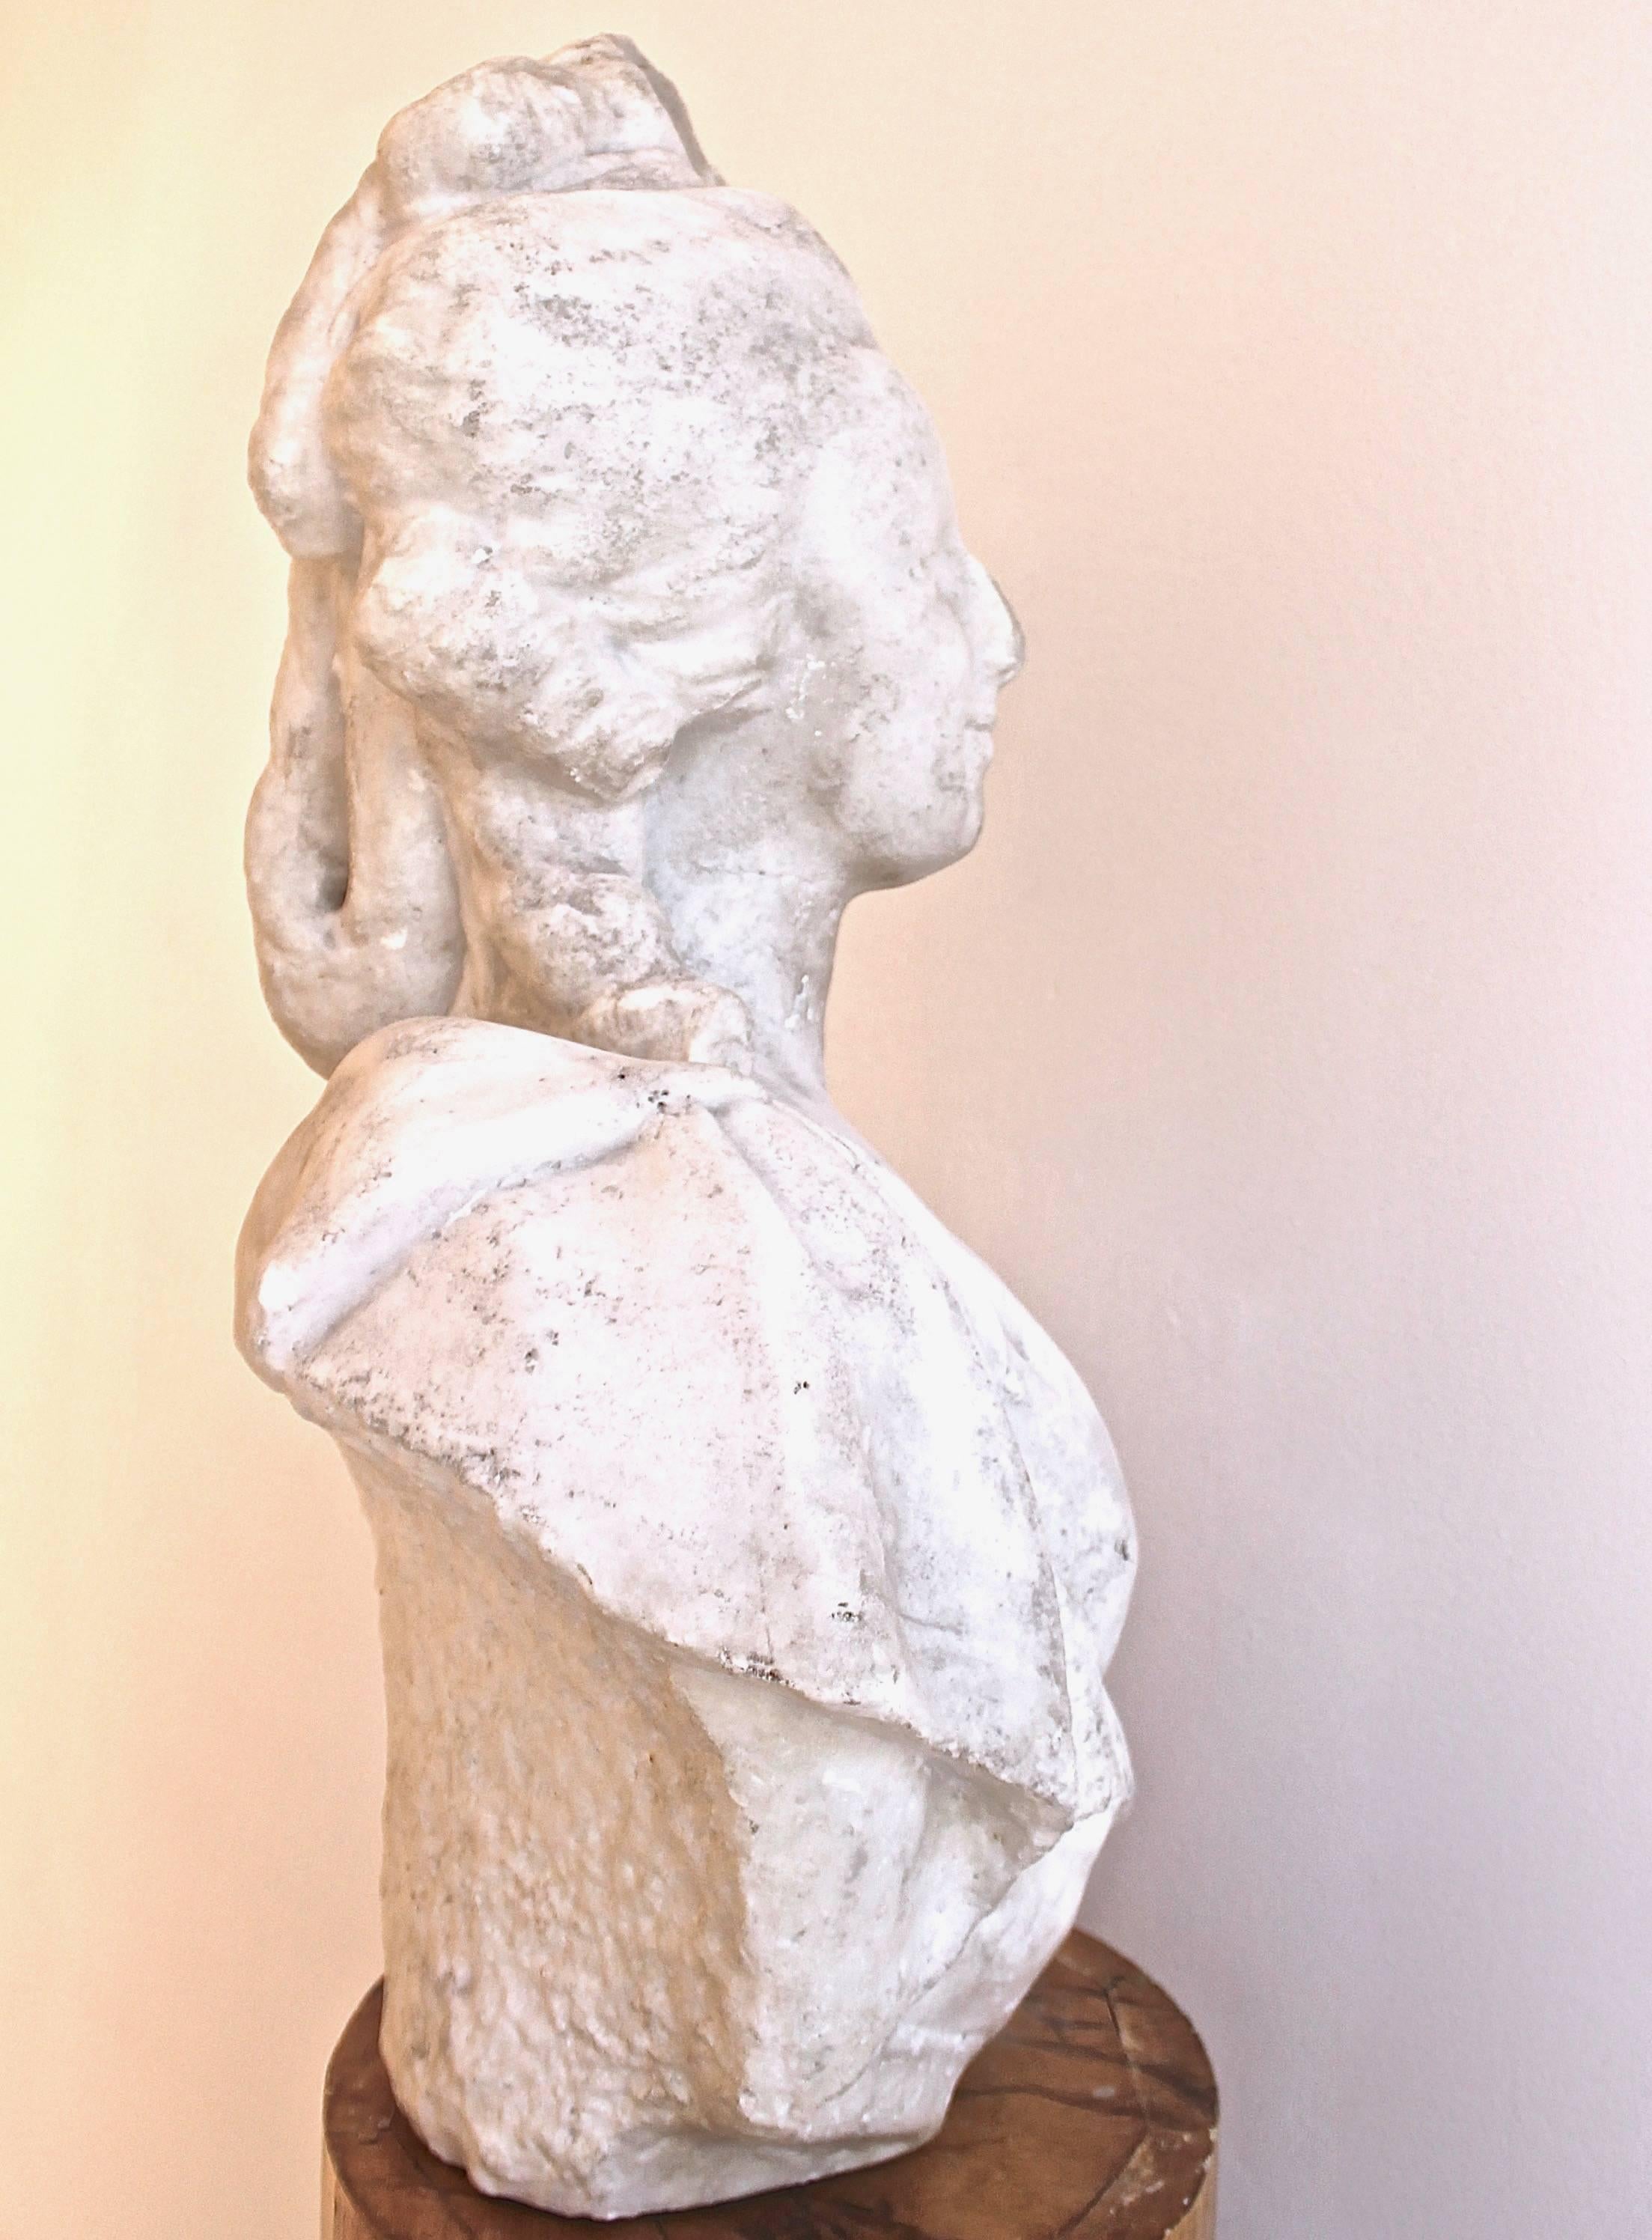 Beautiful 18th century marble bust of Marie-Antoinette, wear and losses consistent with age and use.